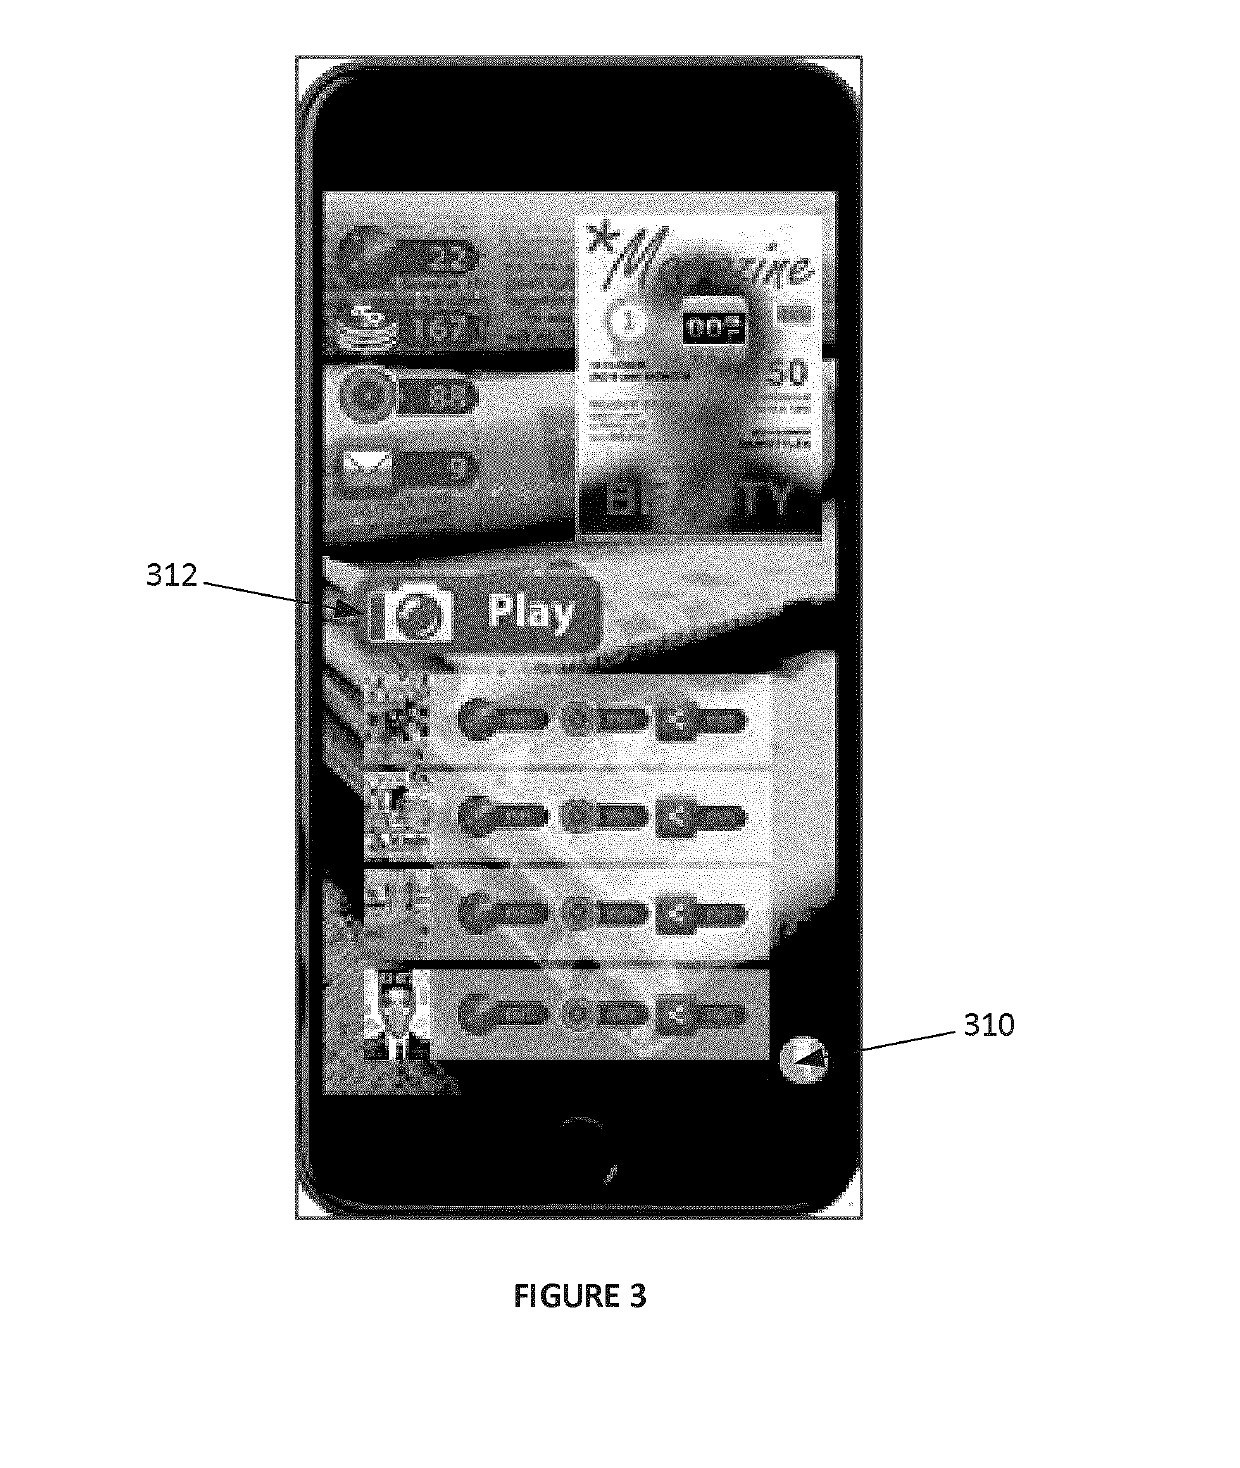 System and method for providing augmented reality interactions over printed media